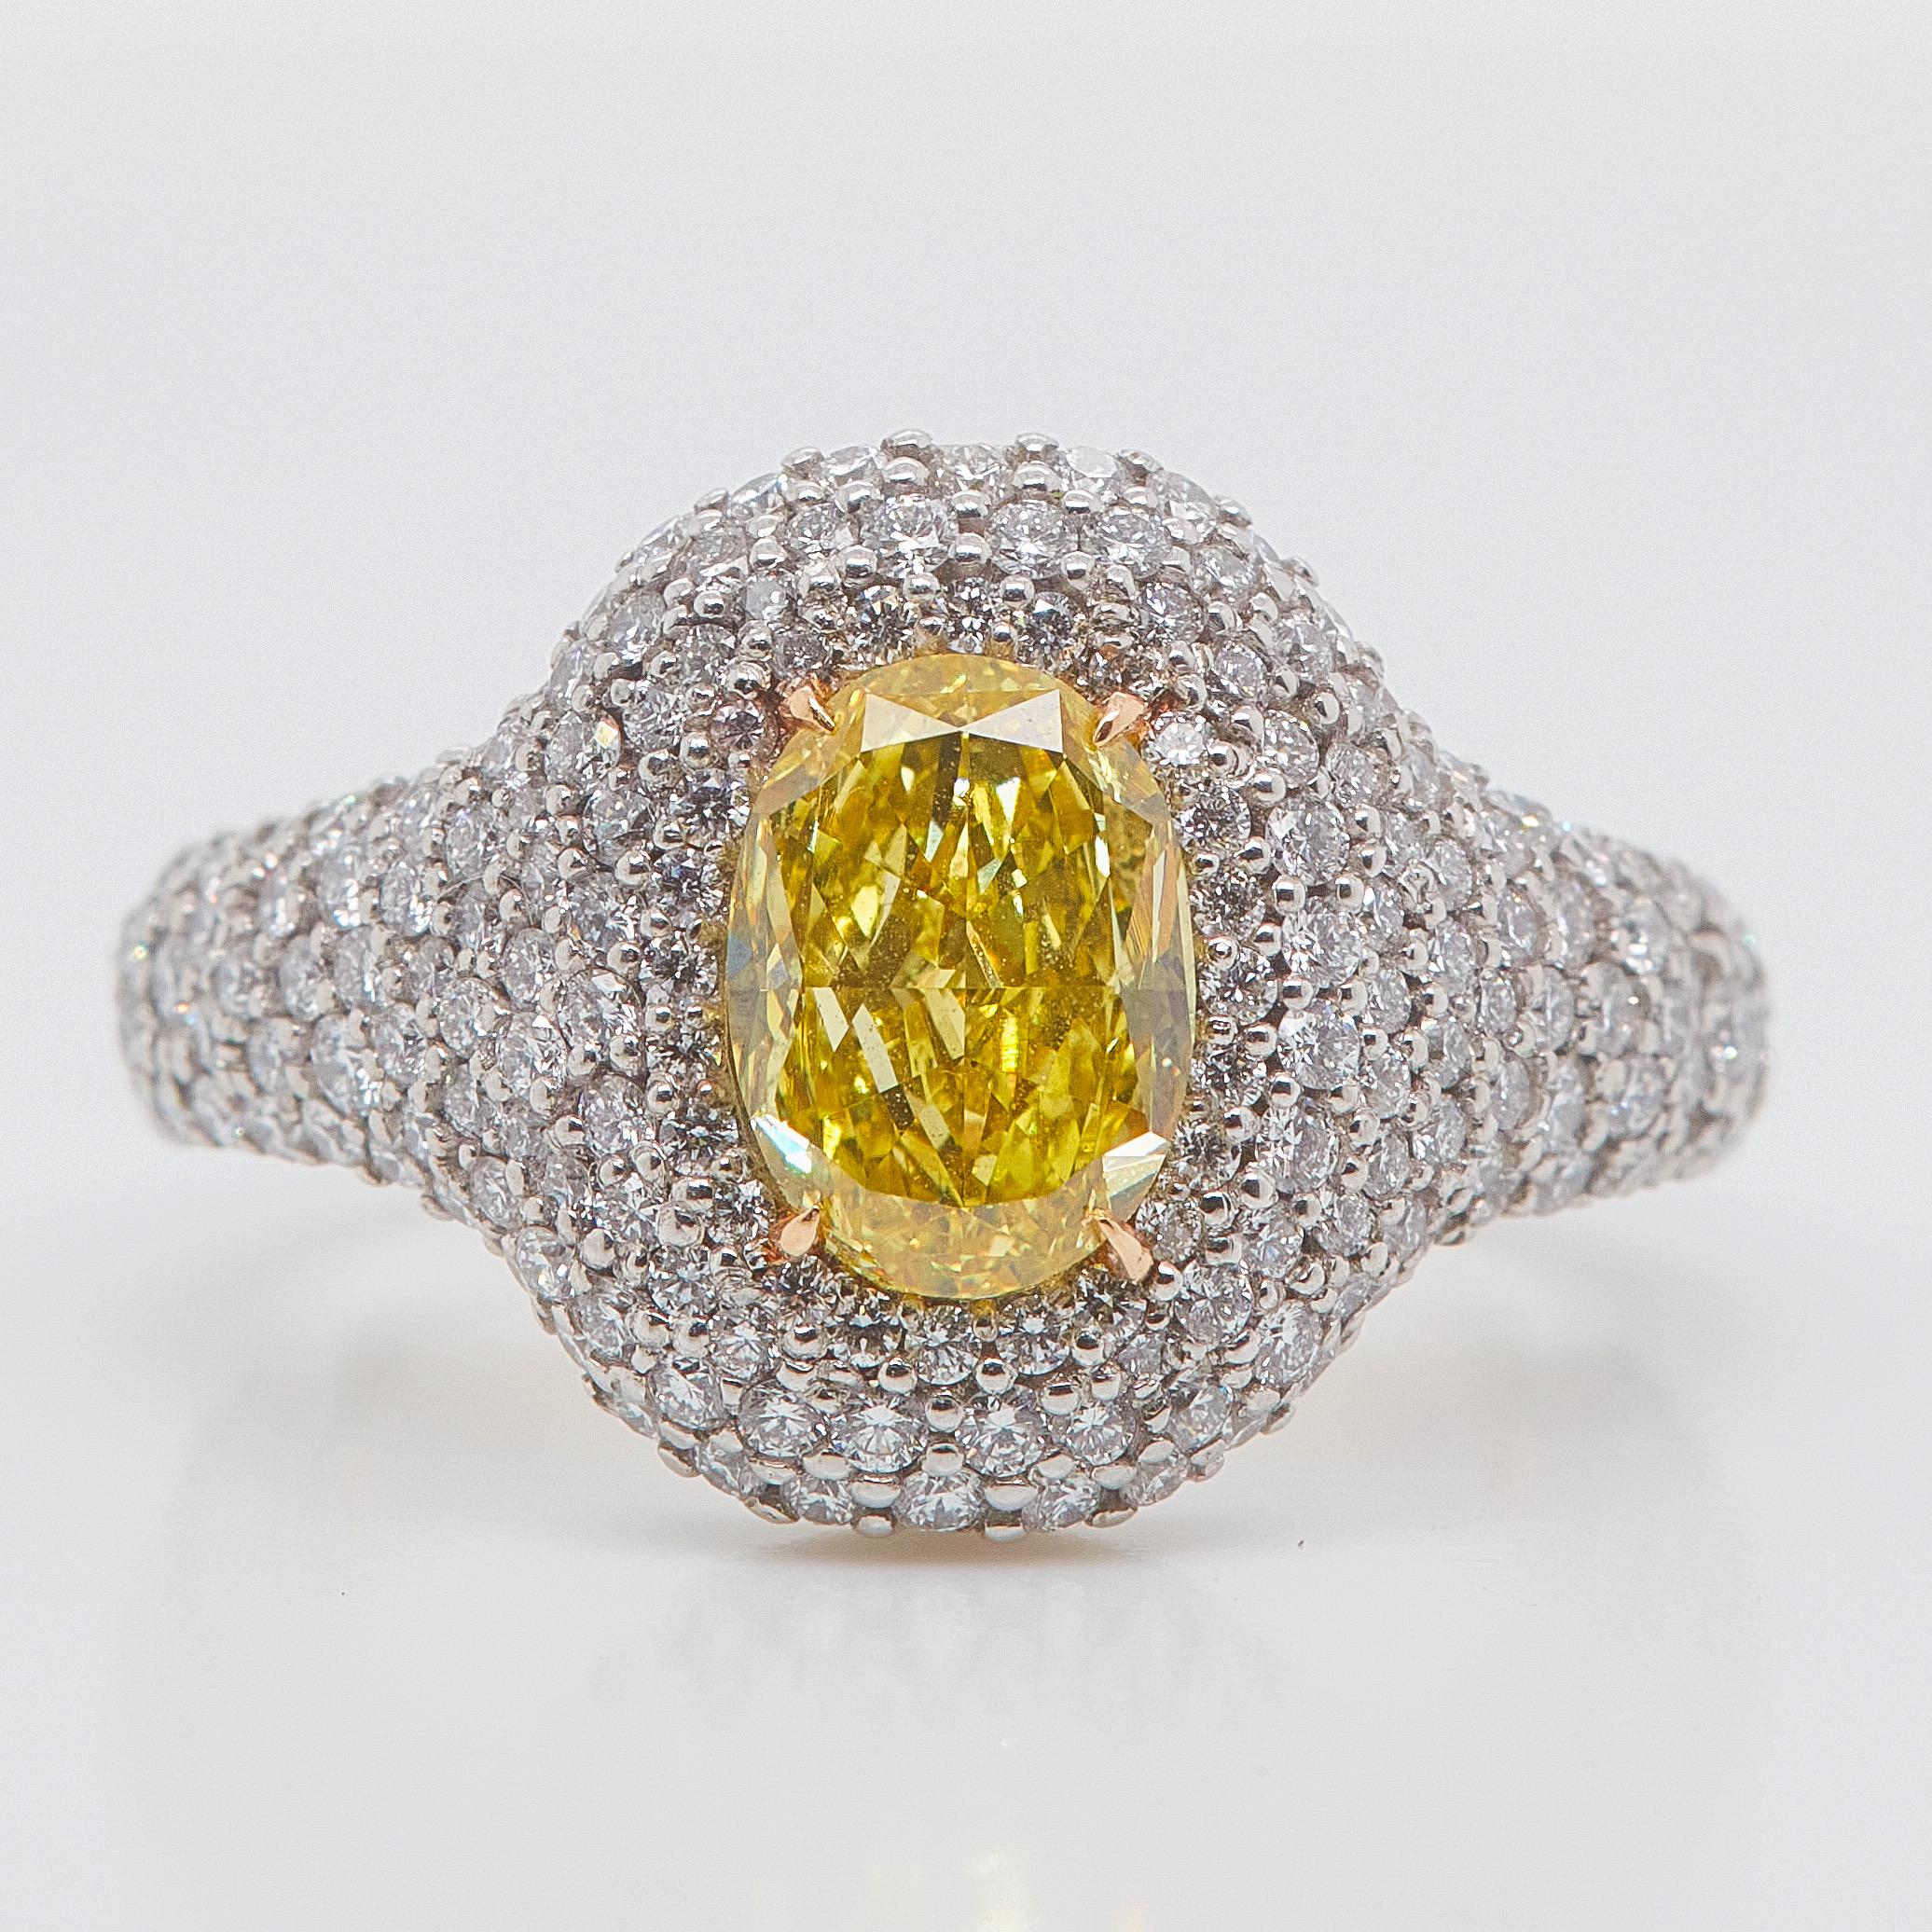 Contemporary Cocktail Ring 1.70 Carat Fancy Vivid Yellow Oval Cut Diamond, GIA Certified For Sale